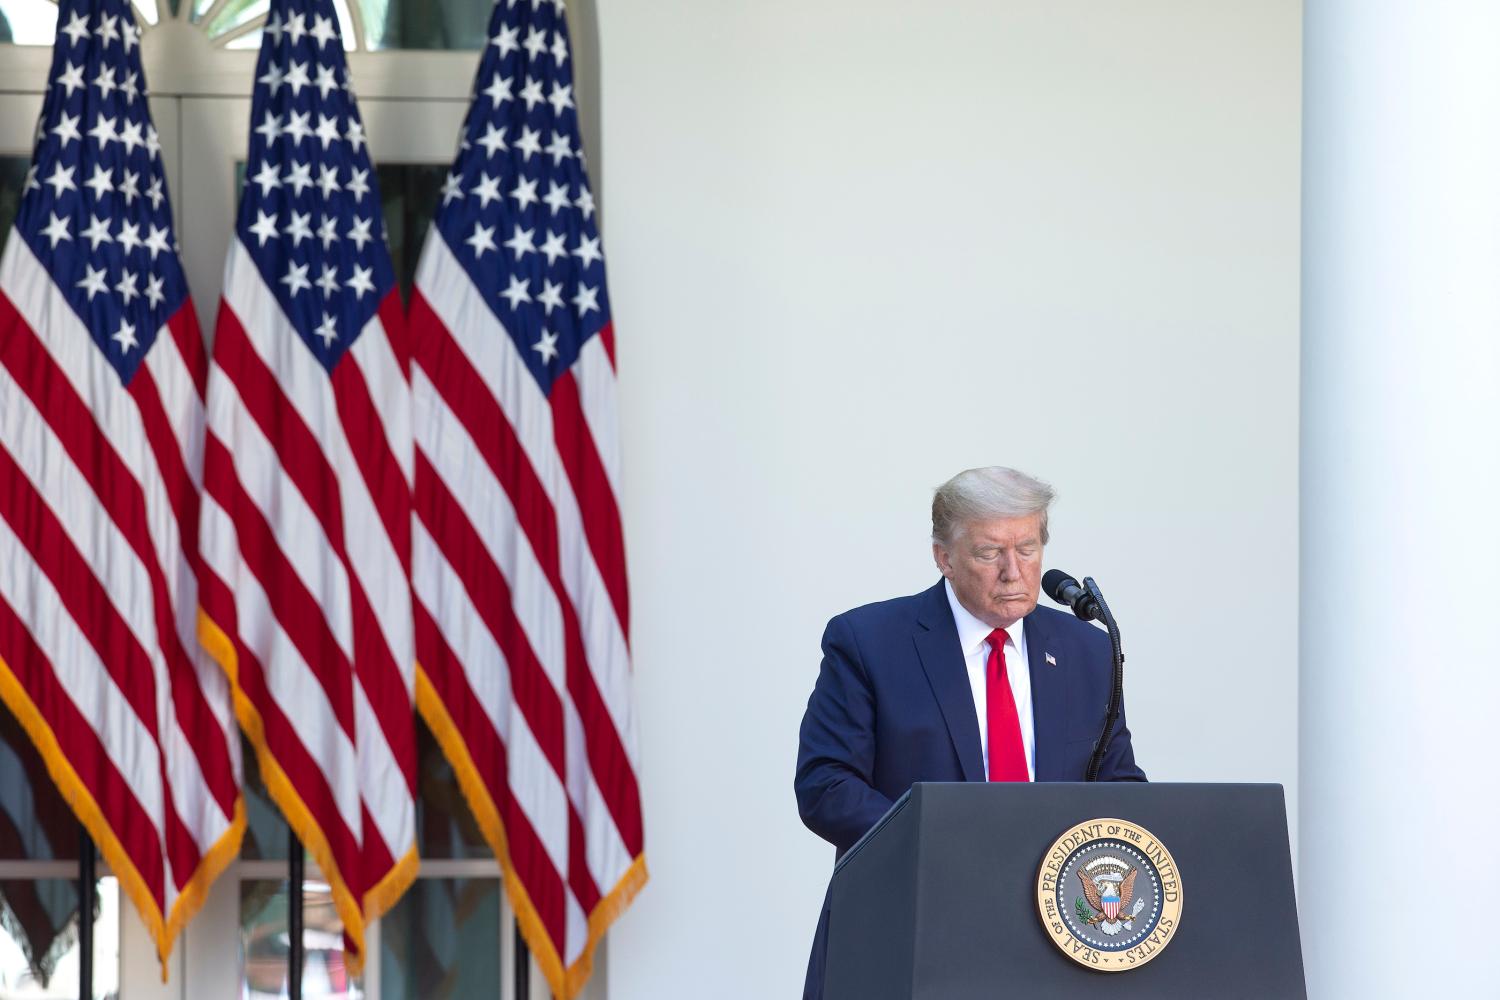 United States President Donald J. Trump participates in the National Day of Prayer Service at the White House in Washington D.C., U.S., on Thursday, May 7, 2020. Credit: Stefani Reynolds / Pool/Sipa USANo Use UK. No Use Germany.